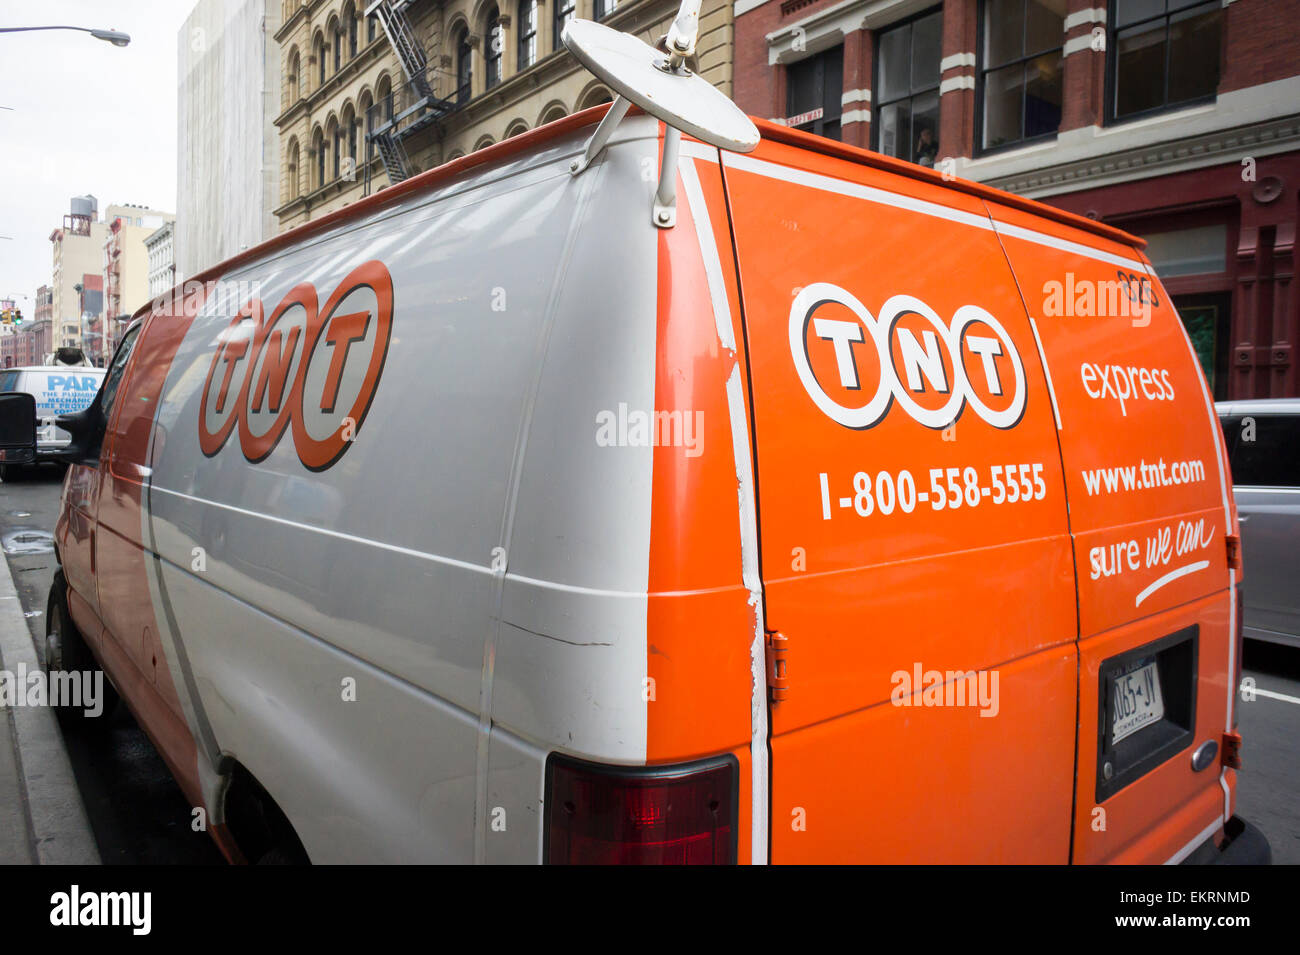 A TNT Express delivery van parked in Soho in New York on Tuesday, April 7, 2015. FedEx announced it will buy the Dutch delivery service TNT Express for 4.4 billion euros. FedEx gains TNT's extensive ground service complemented by FedEx' fleet of planes. (© Richard B. Levine) Stock Photo